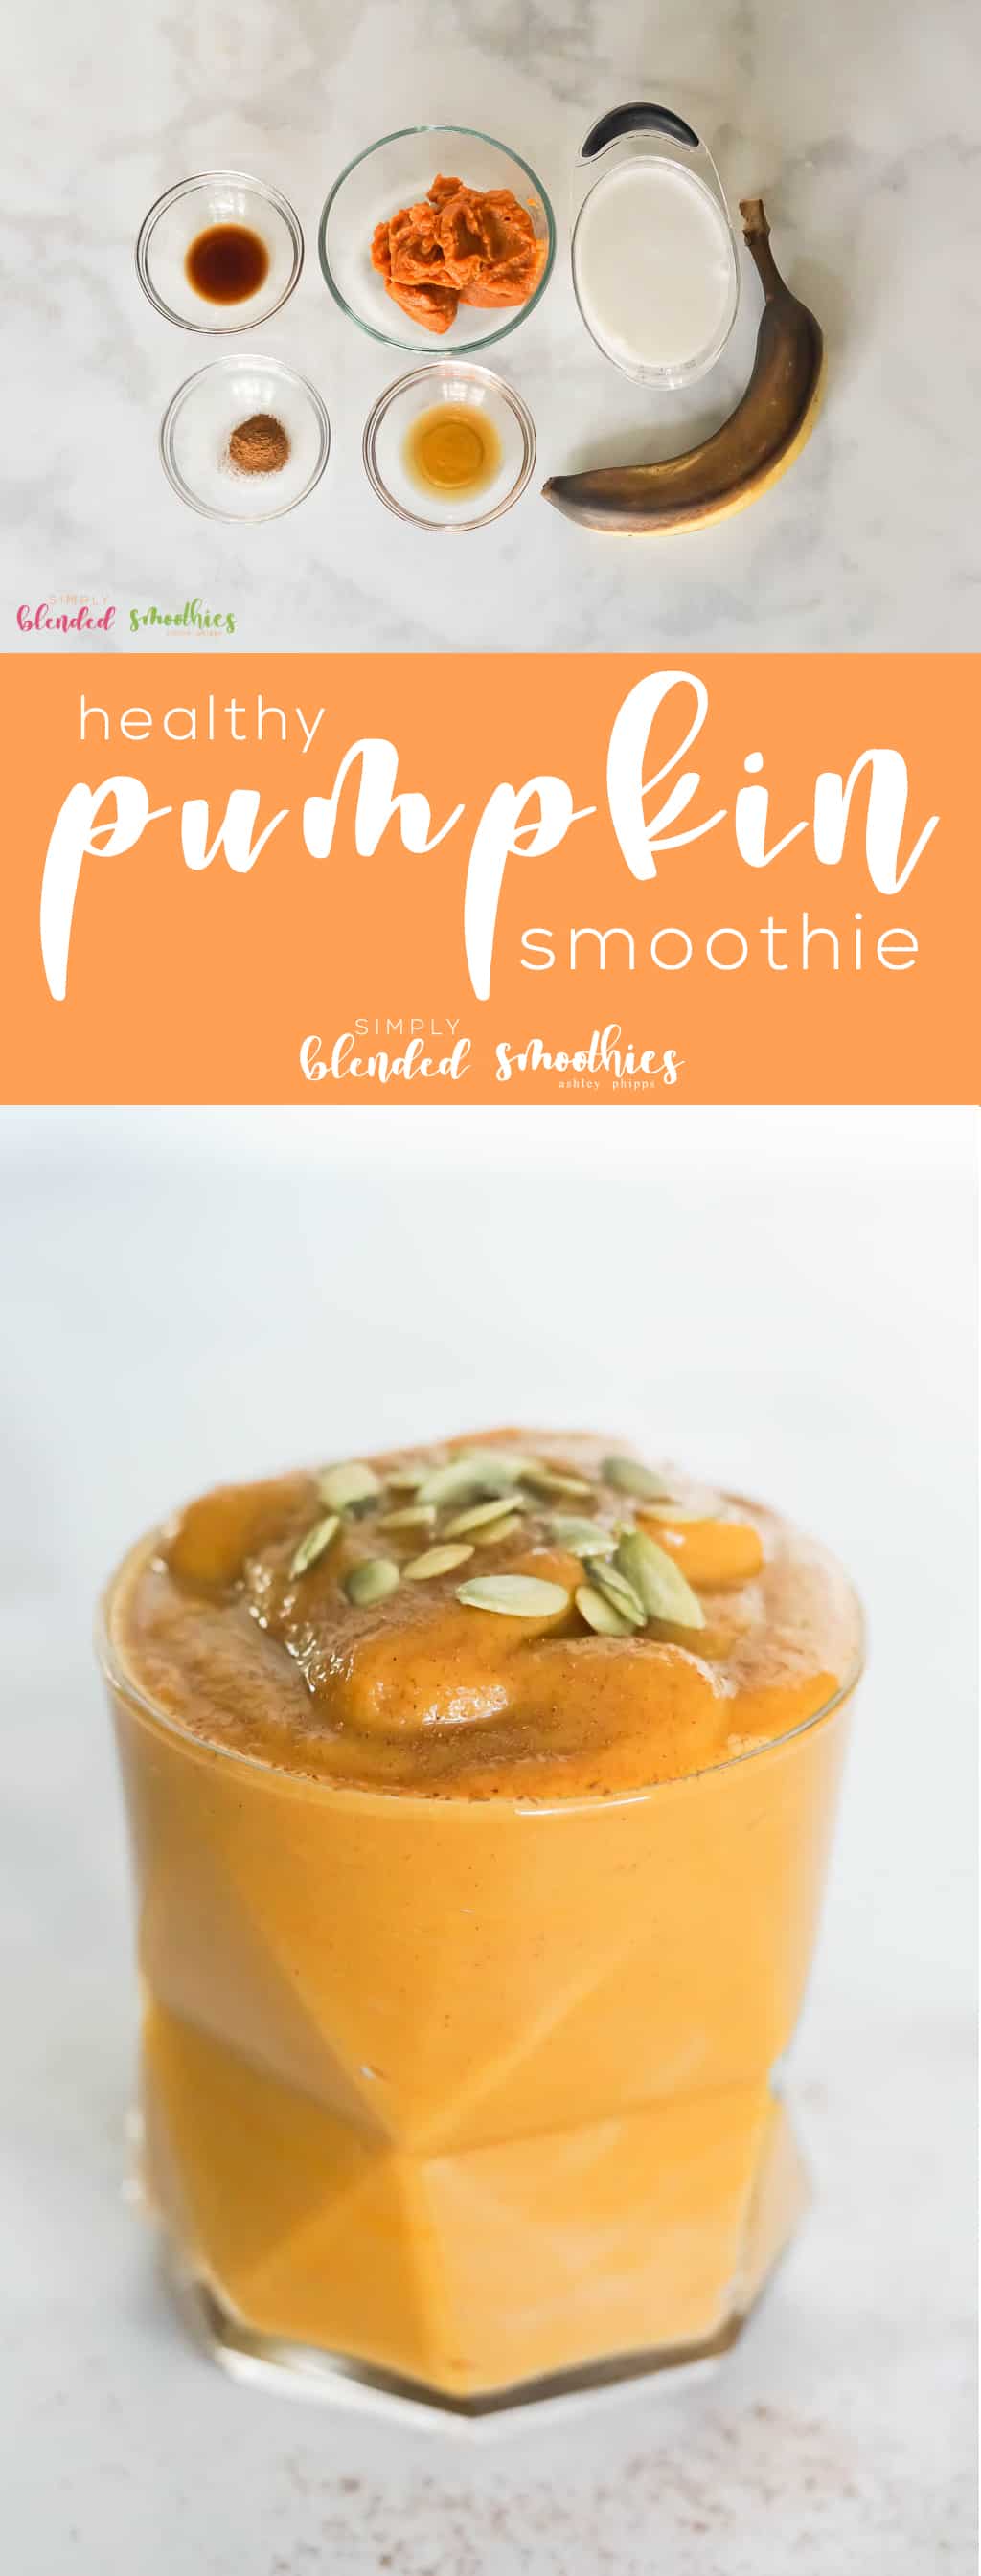 This Healthy Pumpkin Smoothie Recipe Is Made With Pumpkin, Honey, Vanilla, Spice And A Banana And Will Make All Your Pumpkin Spice Dreams Come True!